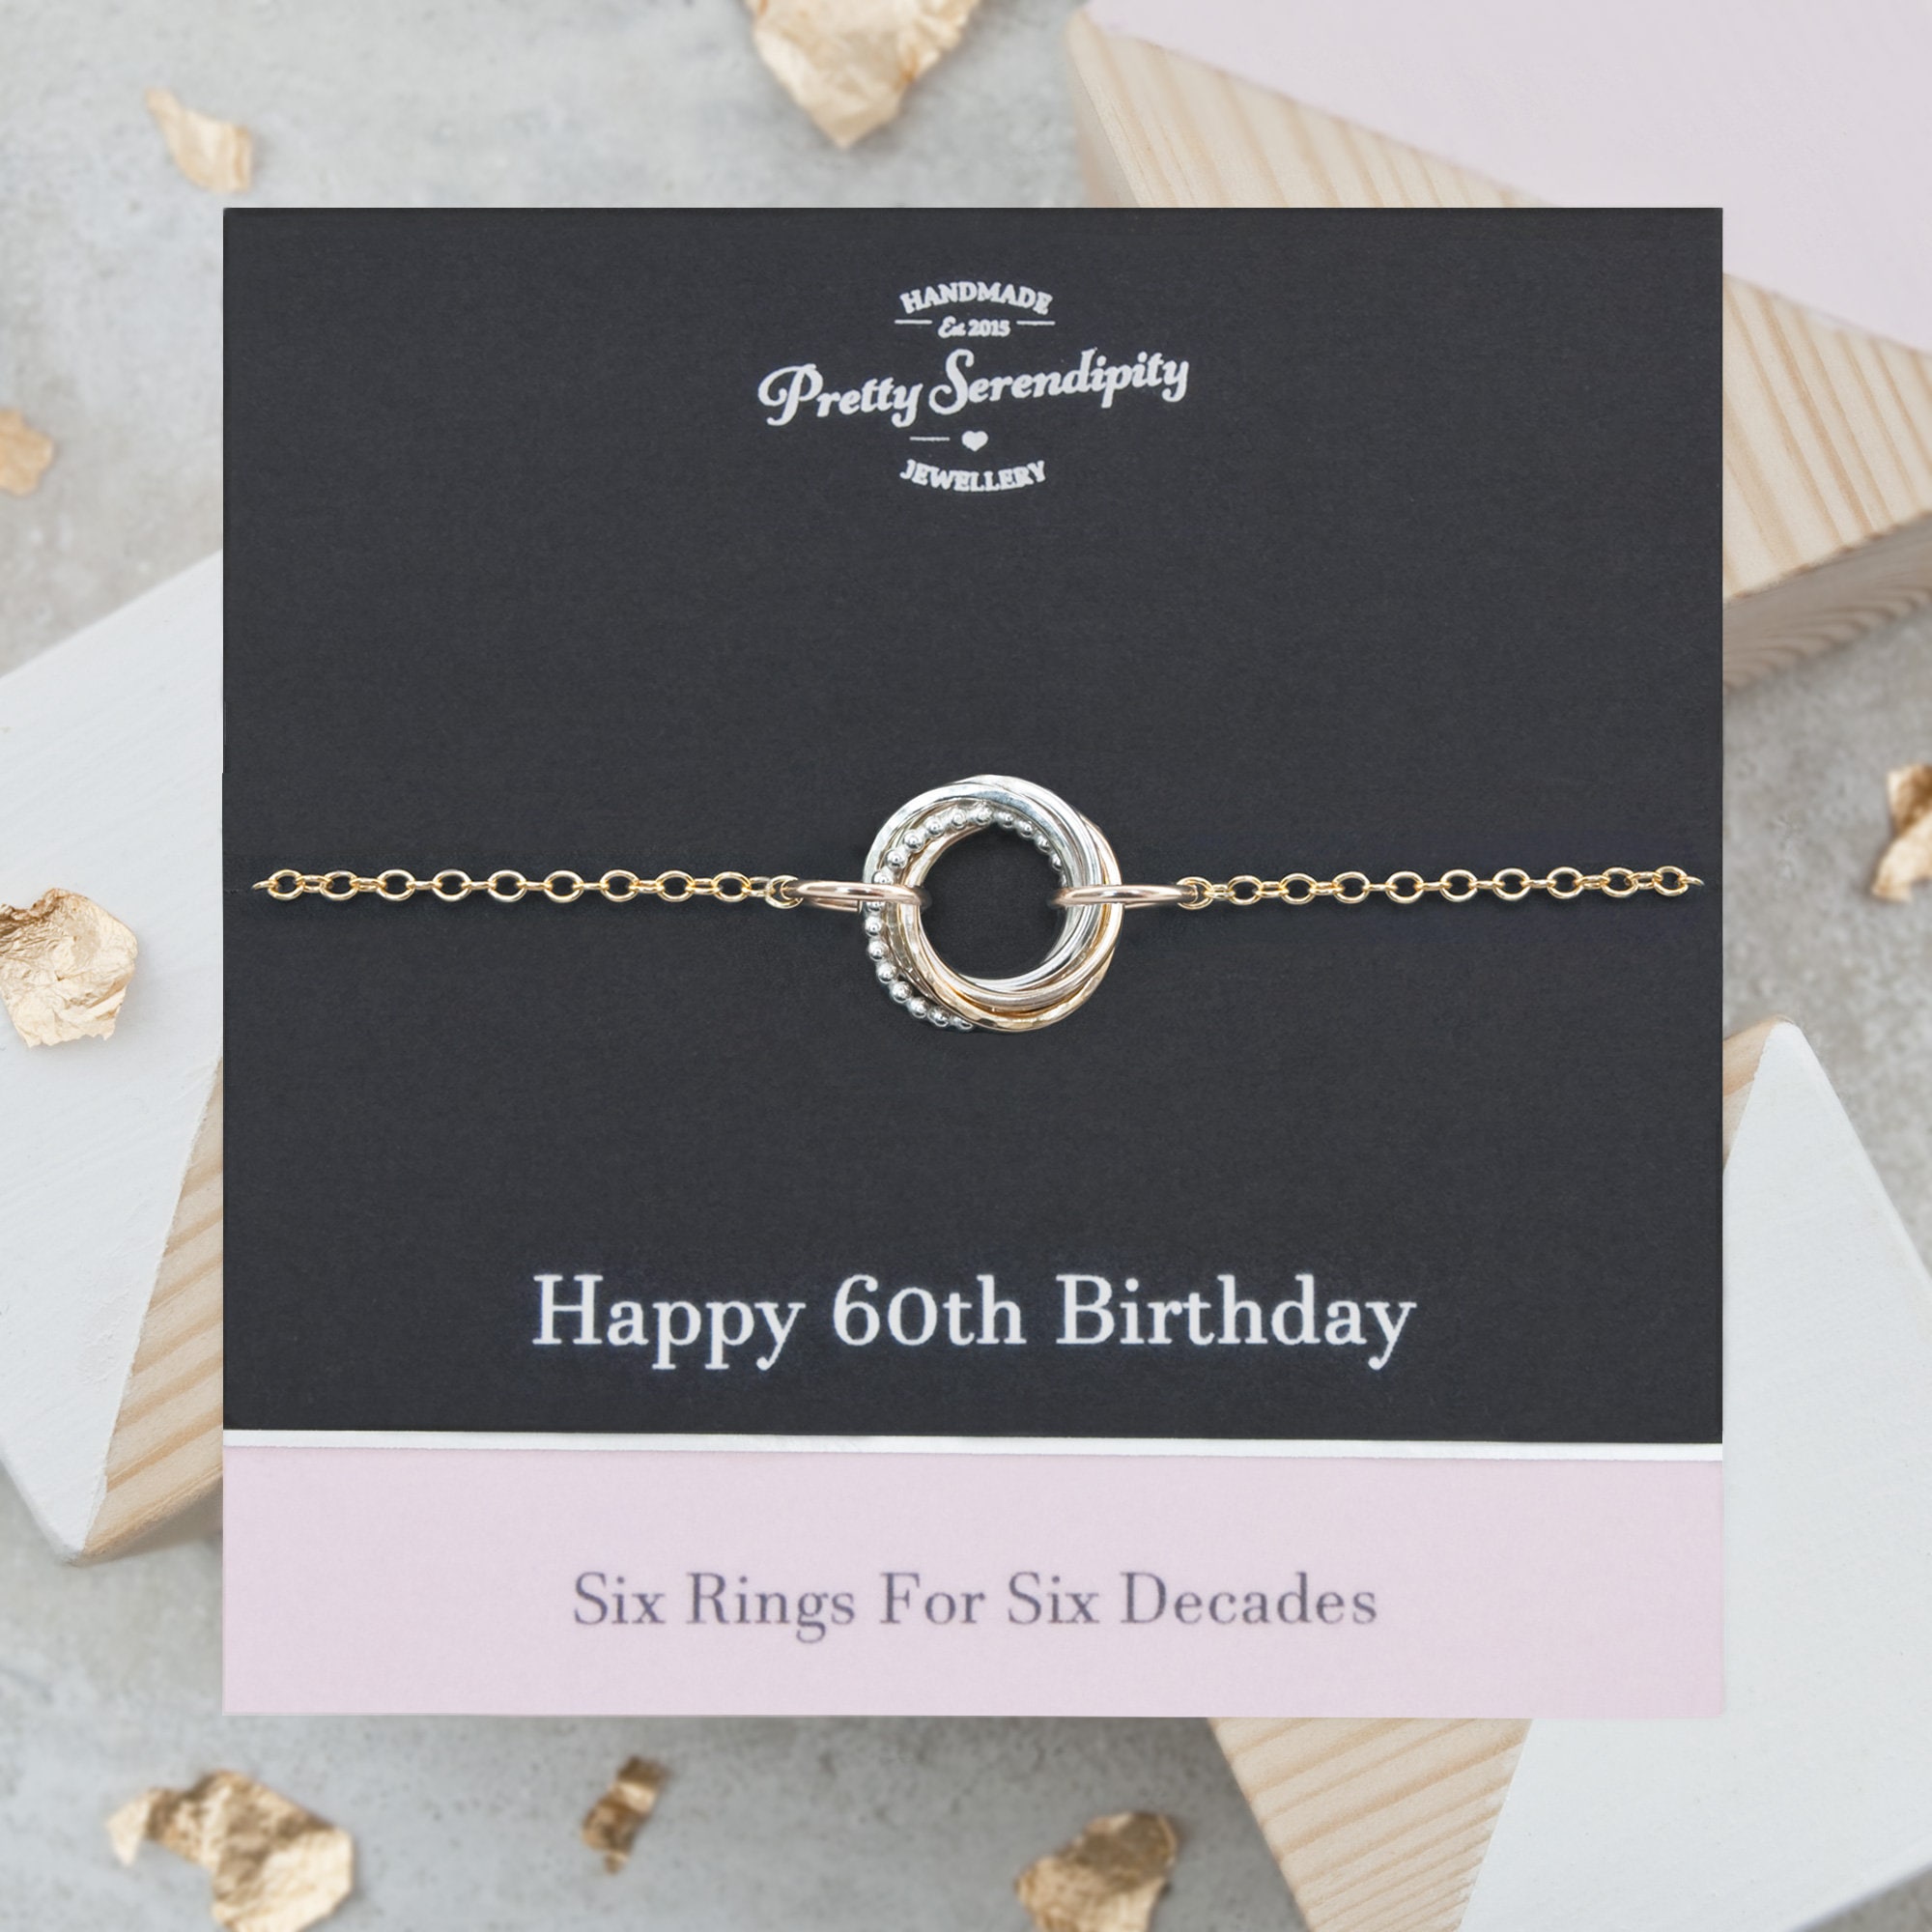 60Th Birthday Mixed Metal Bracelet - 6 Rings For Decades, Gifts Her, Silver & 14Ct Gold Fill